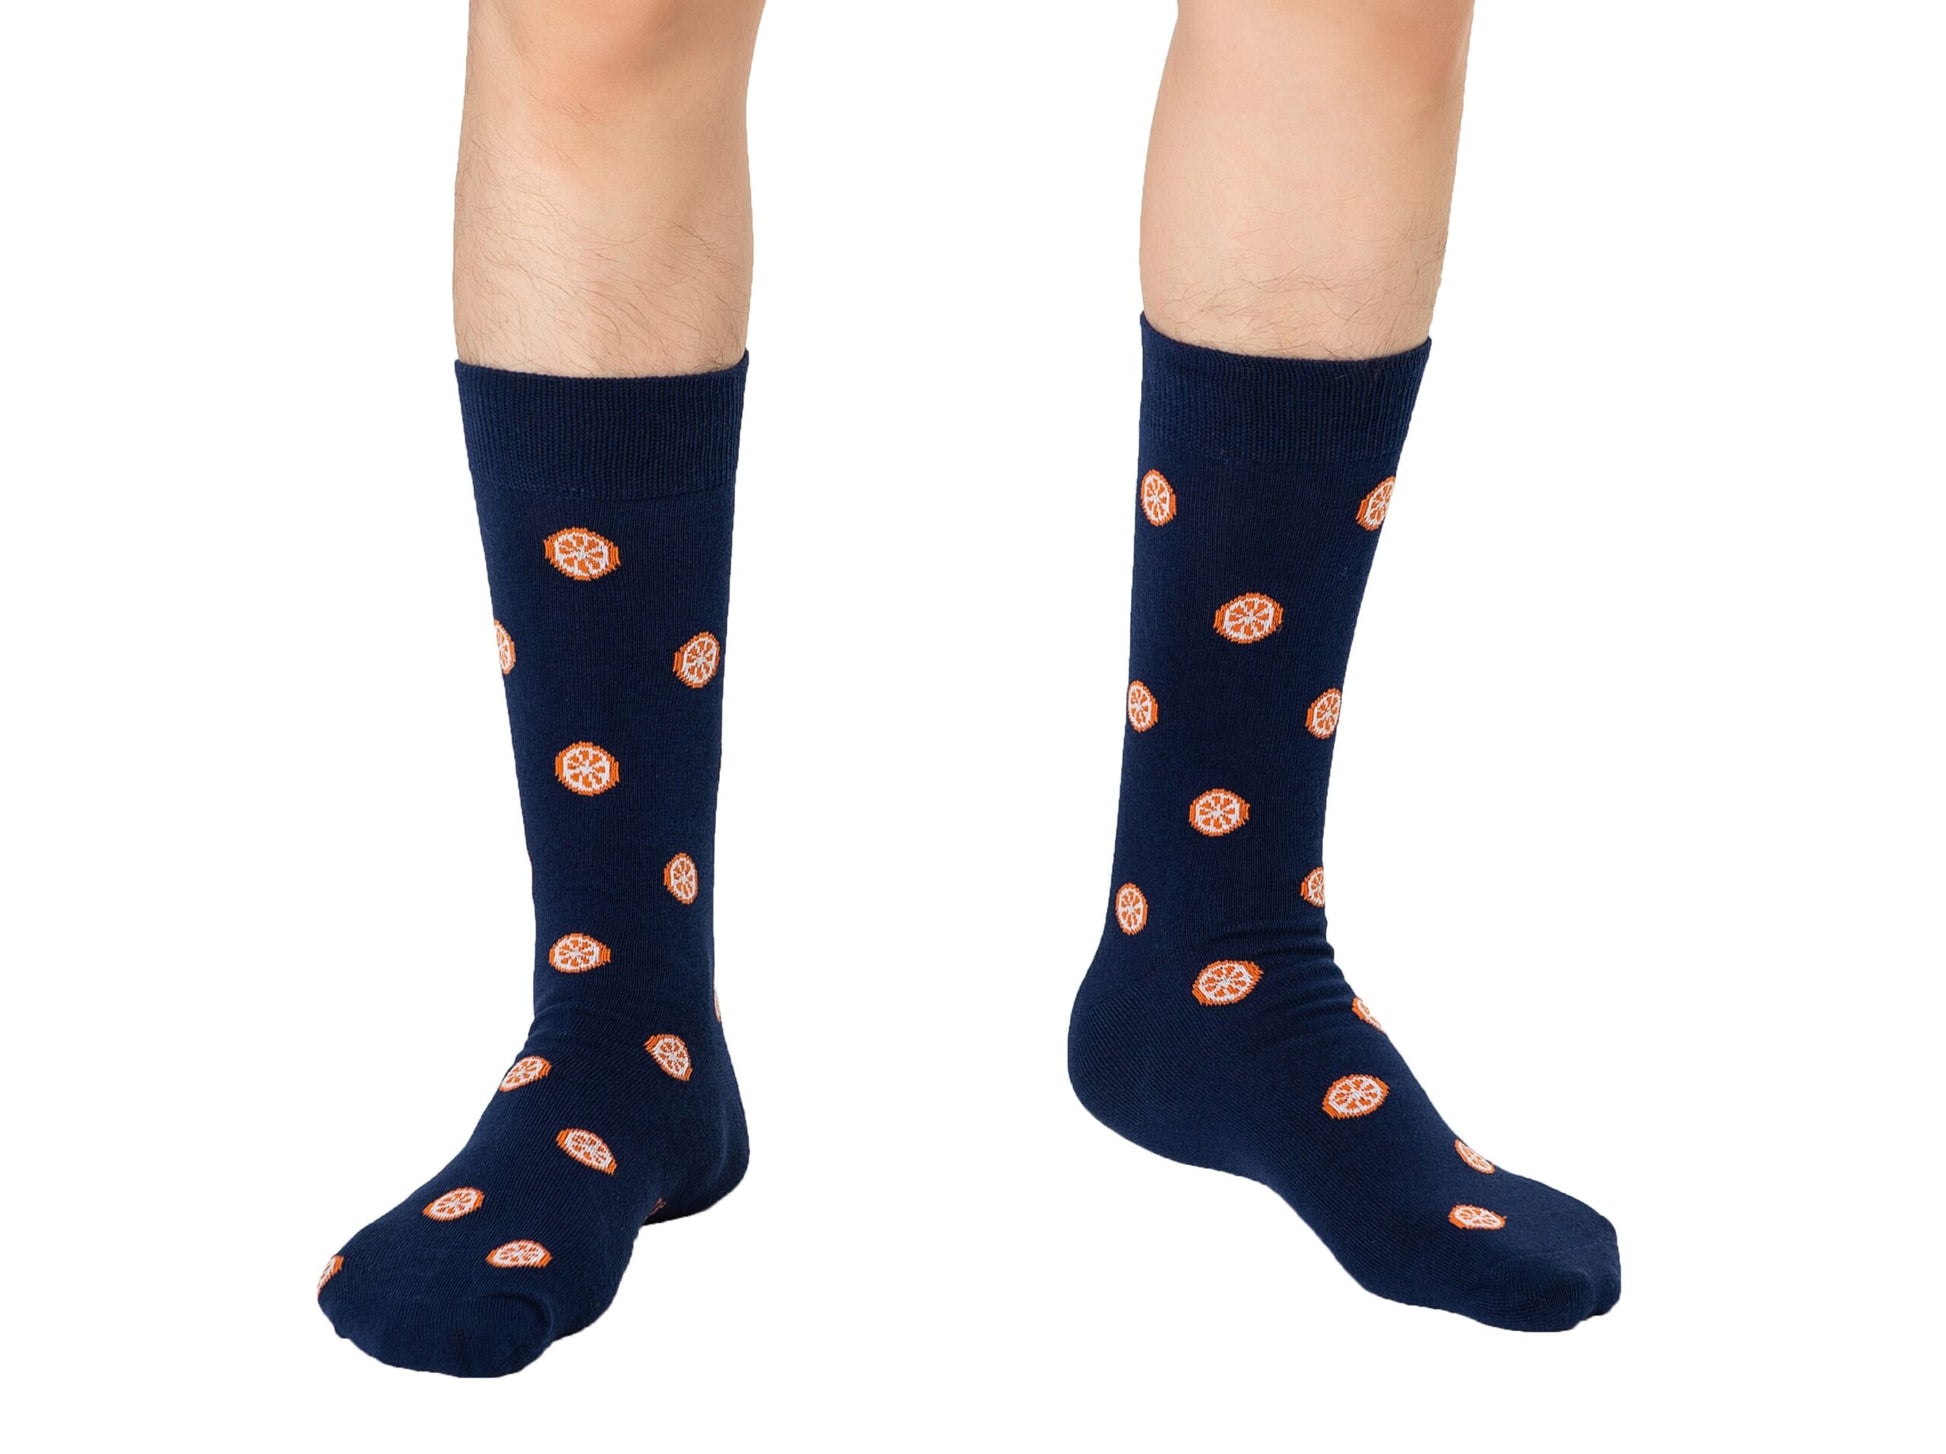 A pair of legs enveloped in Orange Socks, featuring orange circular patterns and extending from heel to toe, is isolated against a pristine white background, offering a visual testament to citrusy comfort.